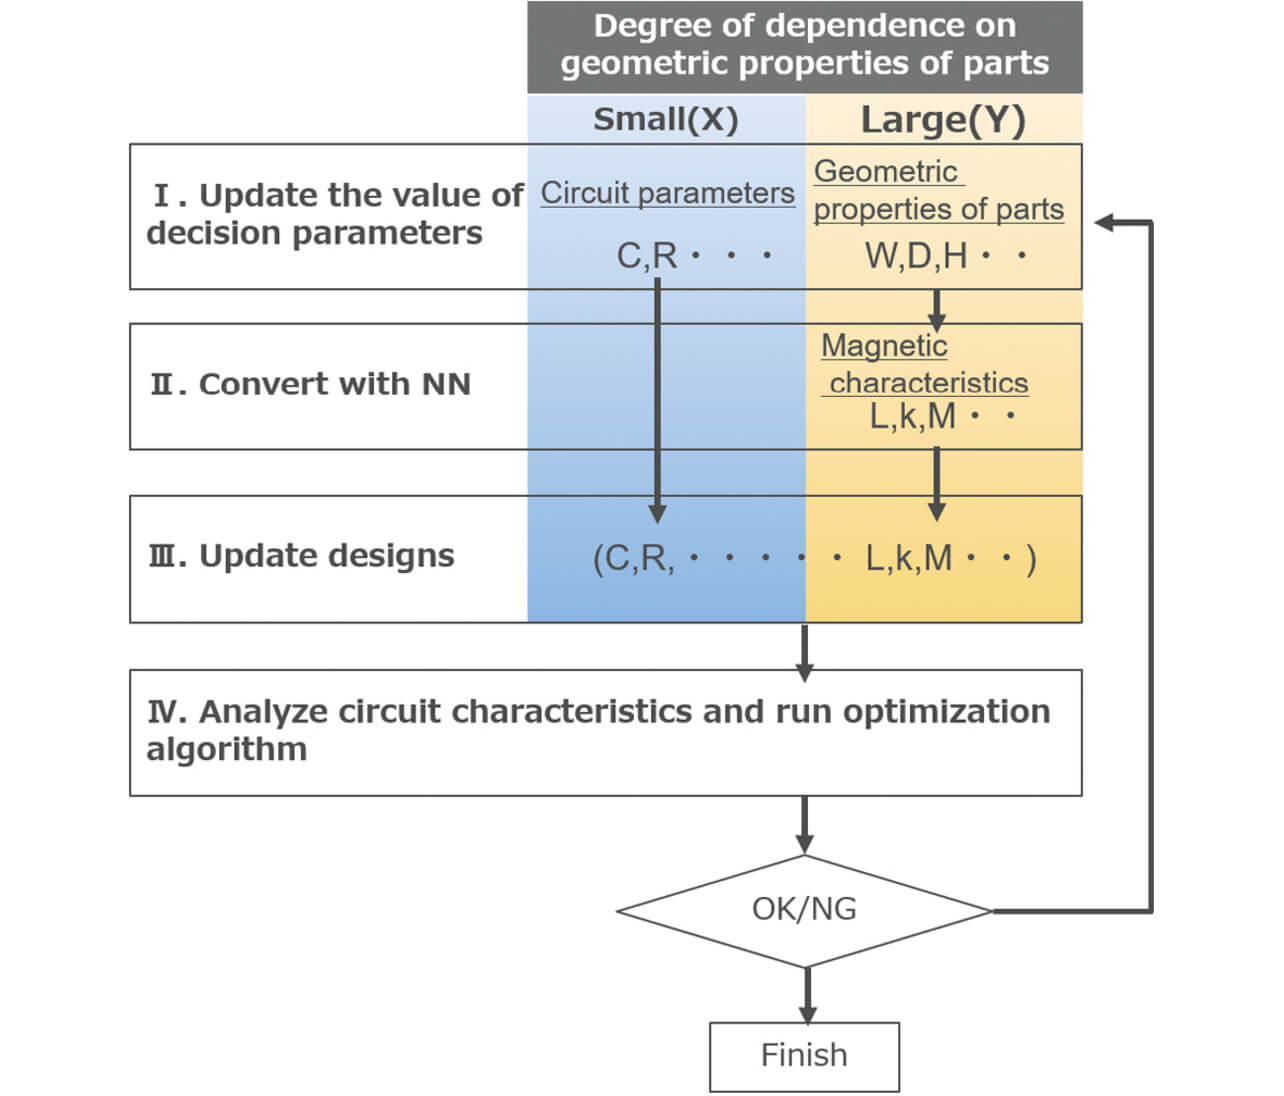 Fig. 4	Flowchart of Optimization Process for Electrical Circuit Parameter Considering Geometrical Properties of Parts